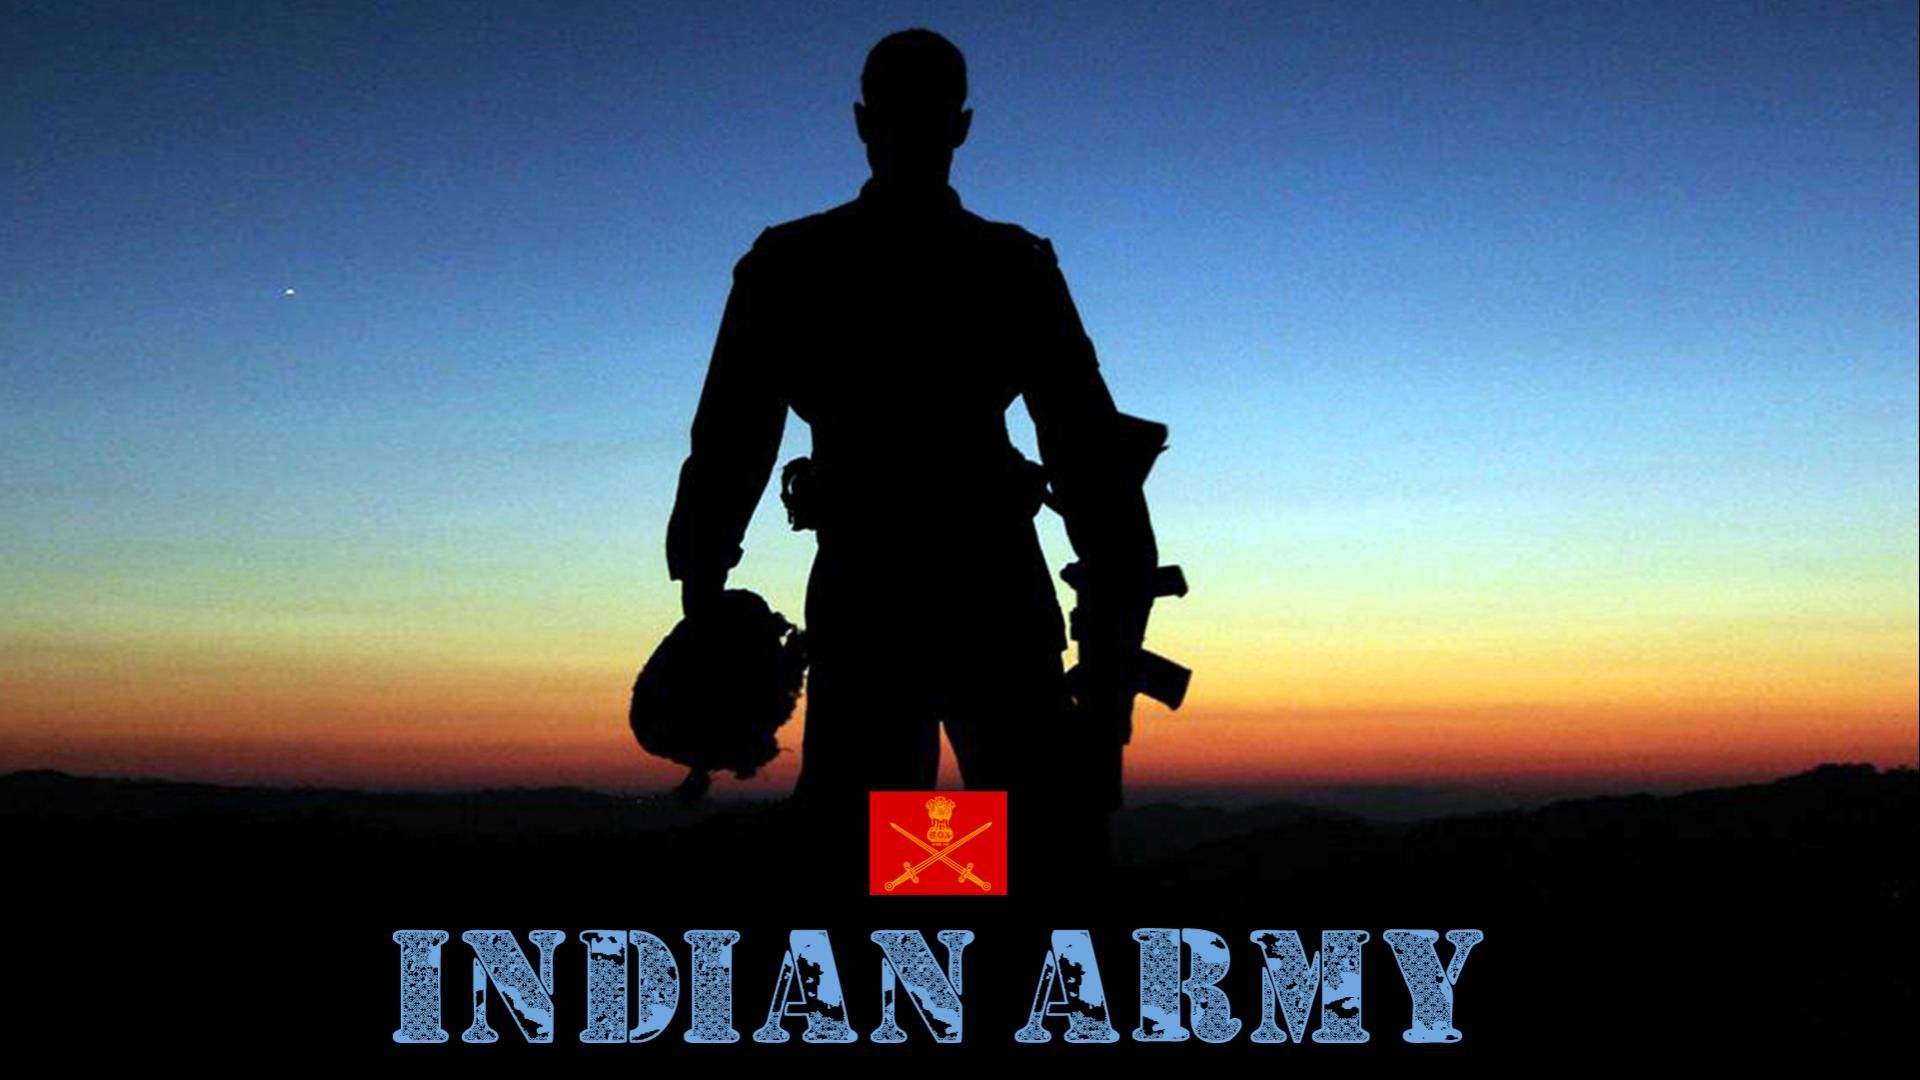 Indian Army HD Wallpaper 1080p Download with Picture of Soldier